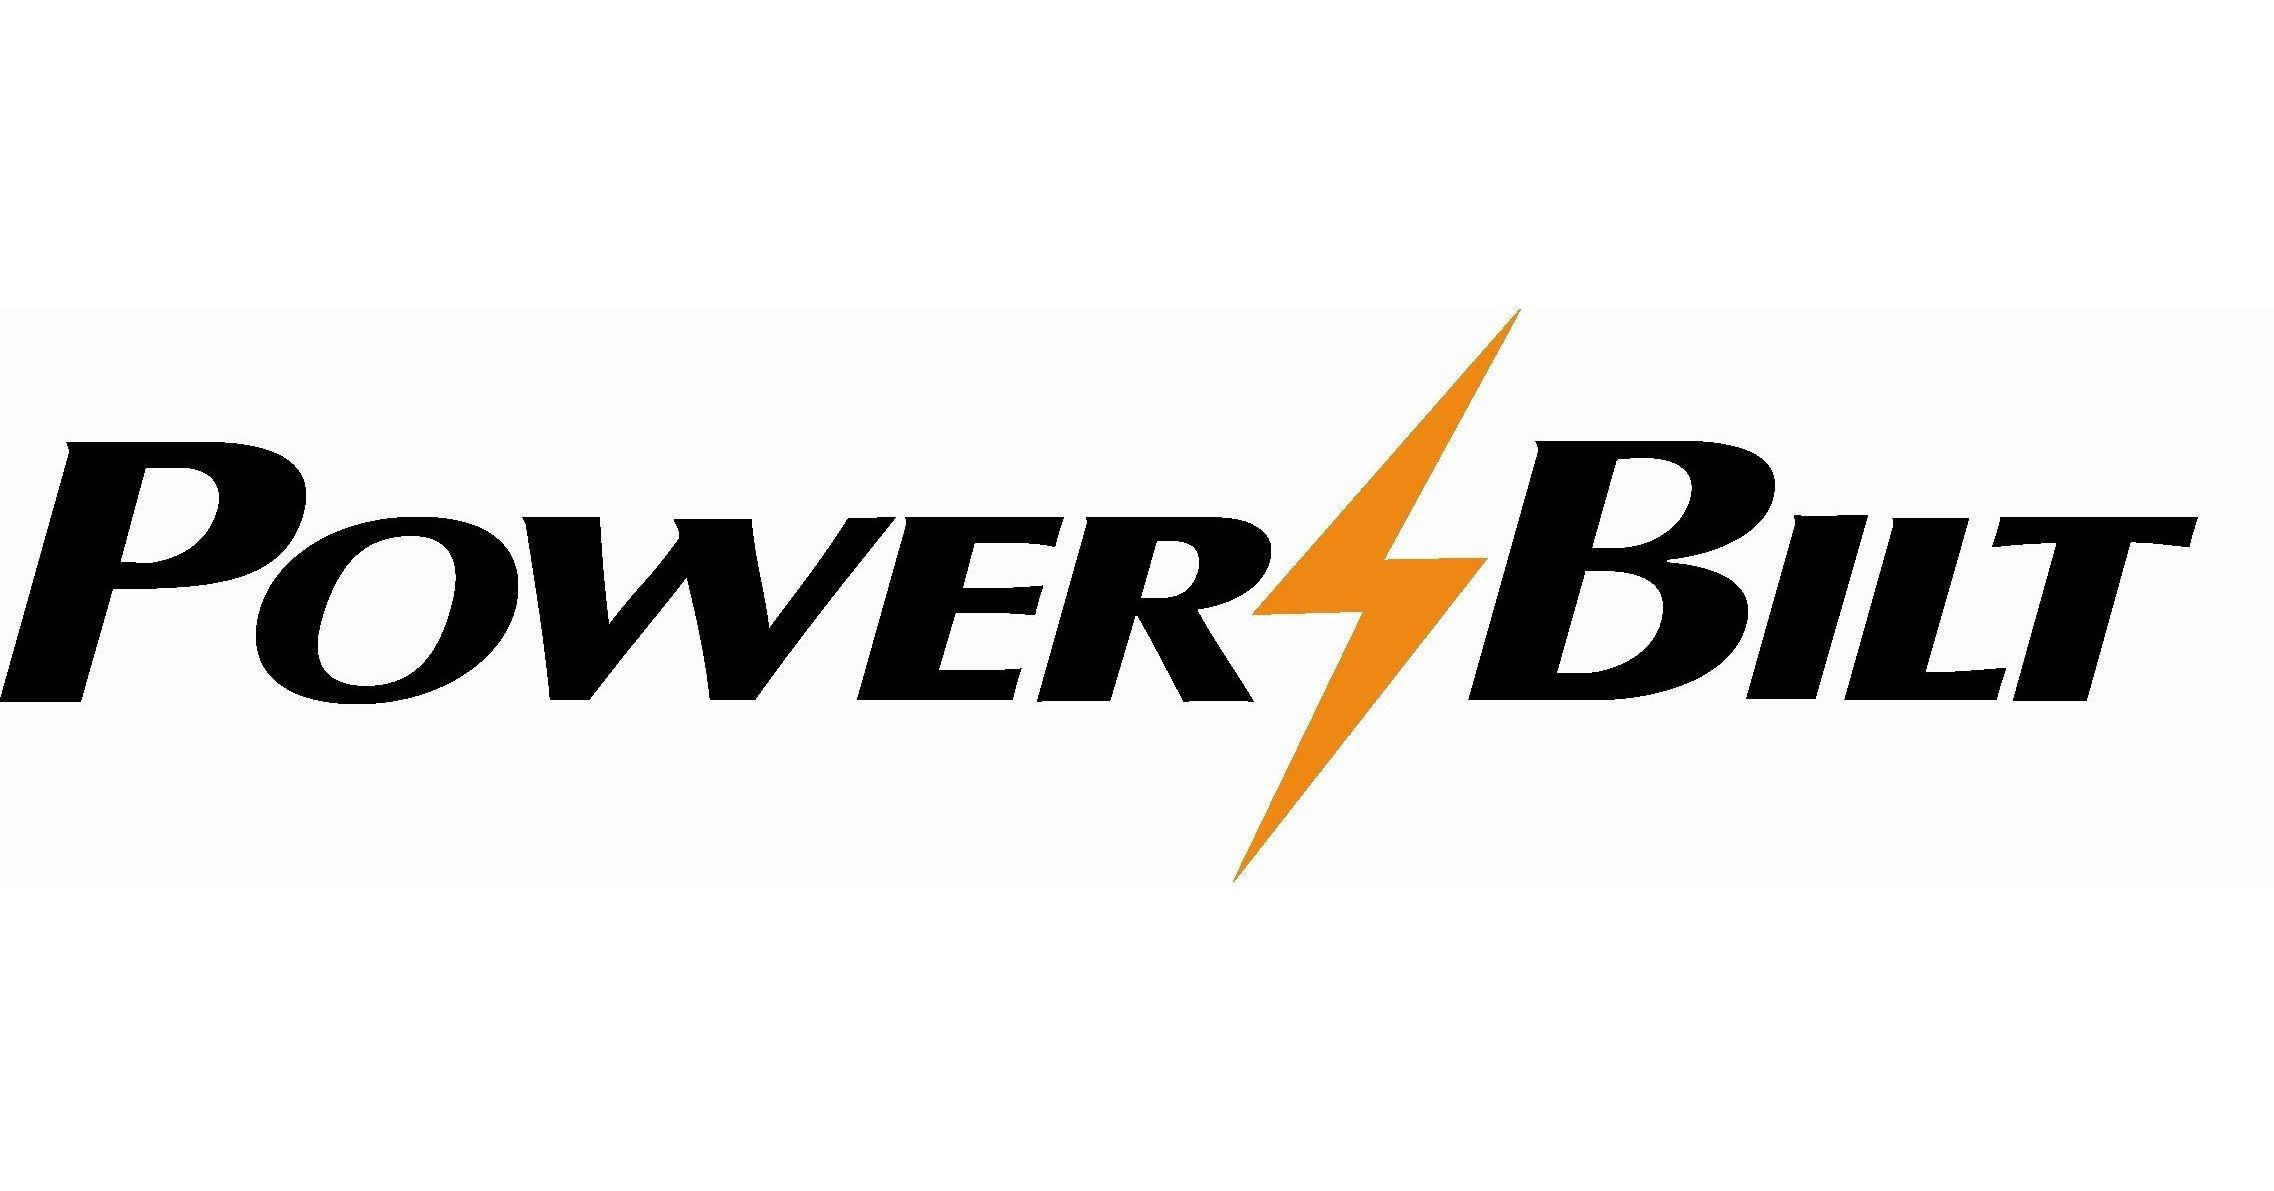 PowerBilt to show new co-branded HEAD x PowerBilt golfing club assortment in collaboration with HEAD Athletics at the 2022 PGA Merchandise Clearly show